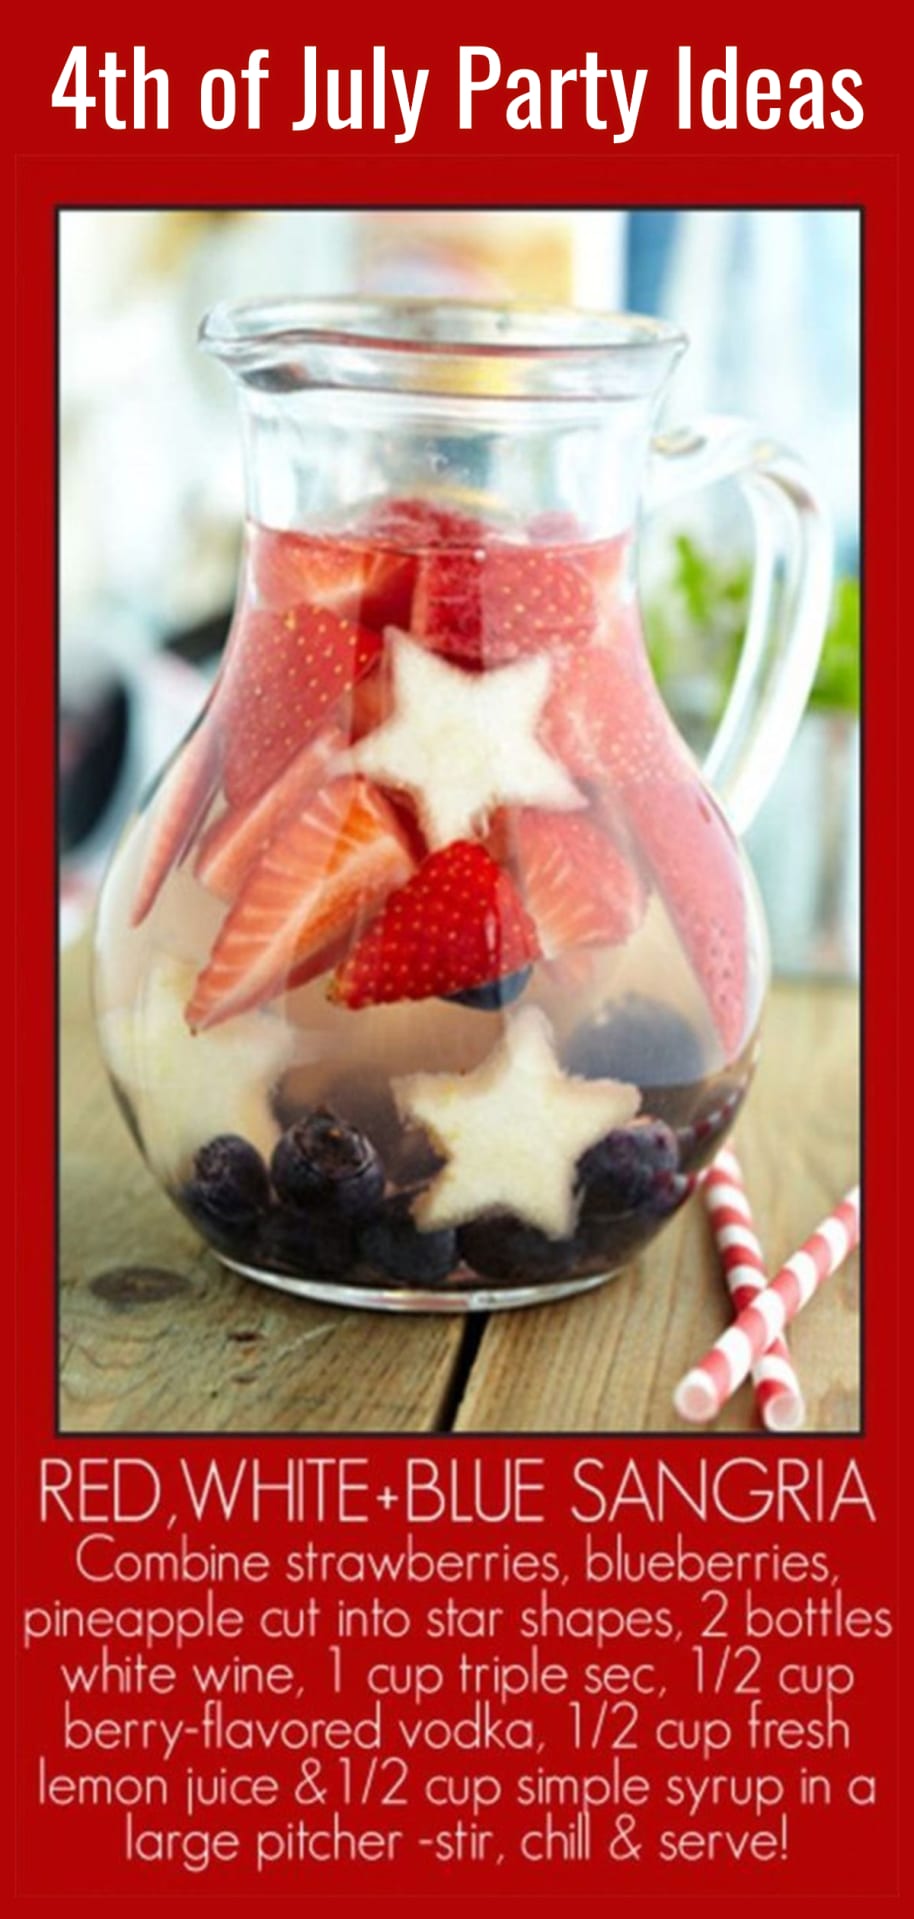 4th of July party ideas - fun drink ideas for the grownups at your 4th of July party, cookout or neighbor block party